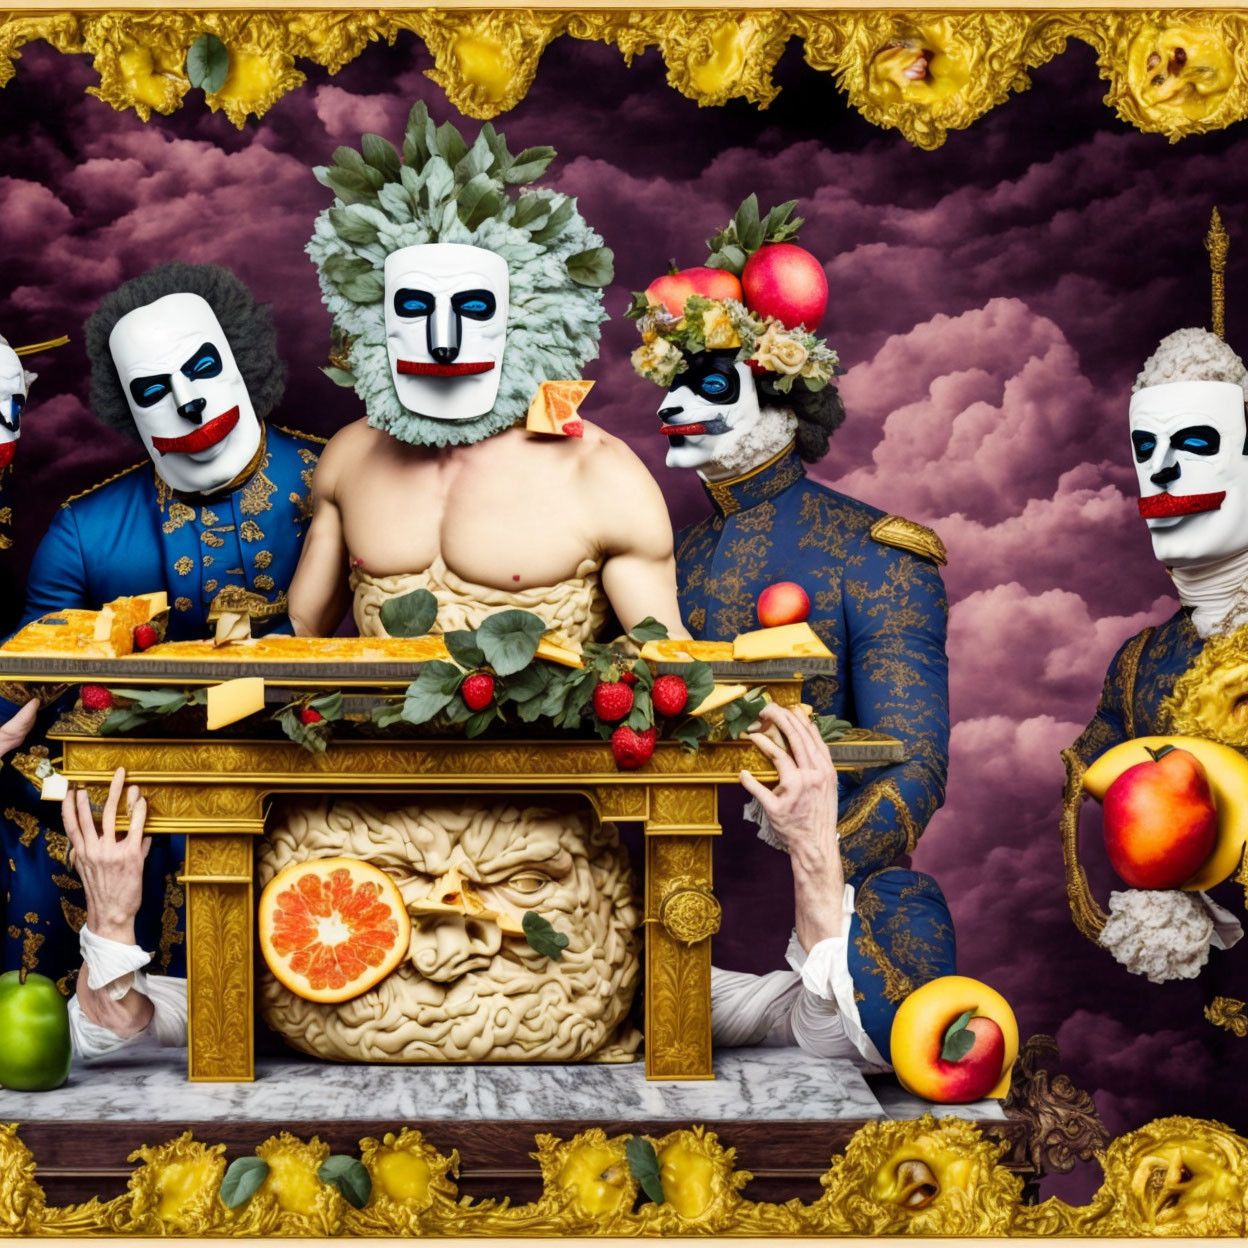 Three individuals in ornate historical outfits with masks pose around a golden table in surreal setting.